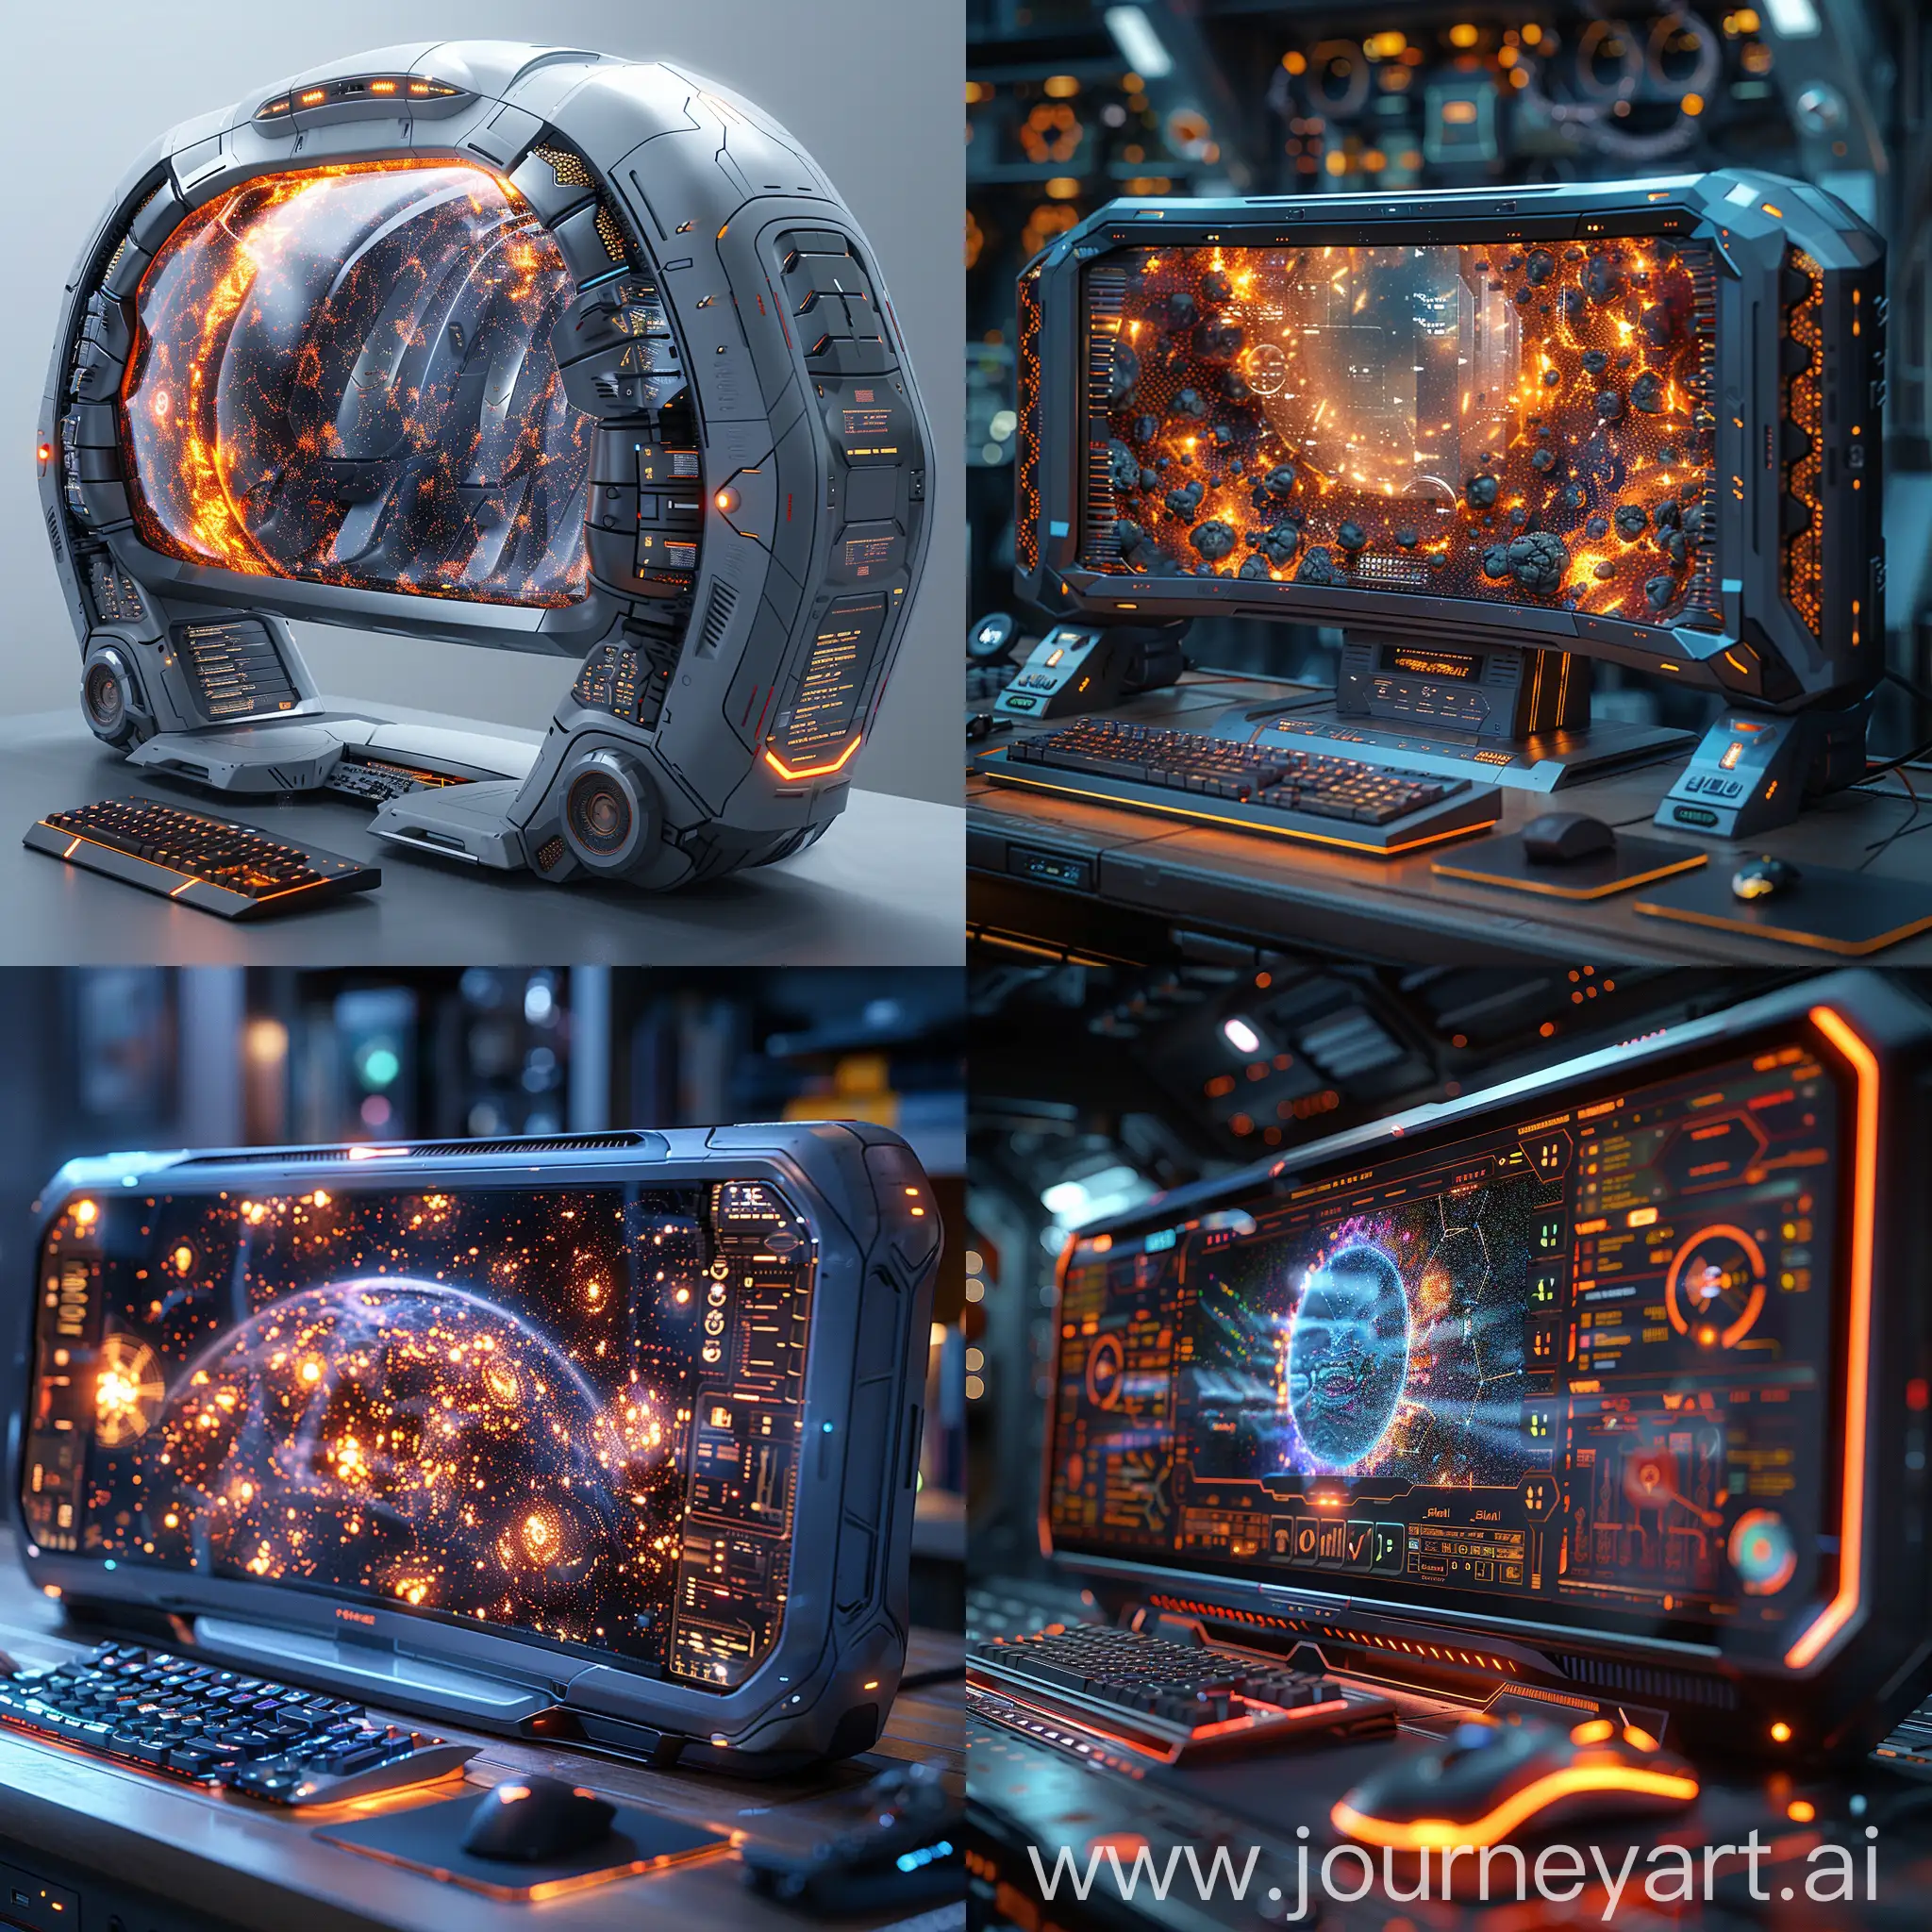 Futuristic-PC-Monitor-with-SelfHealing-Nanocomposite-Shell-and-Shatterproof-Holographic-Display